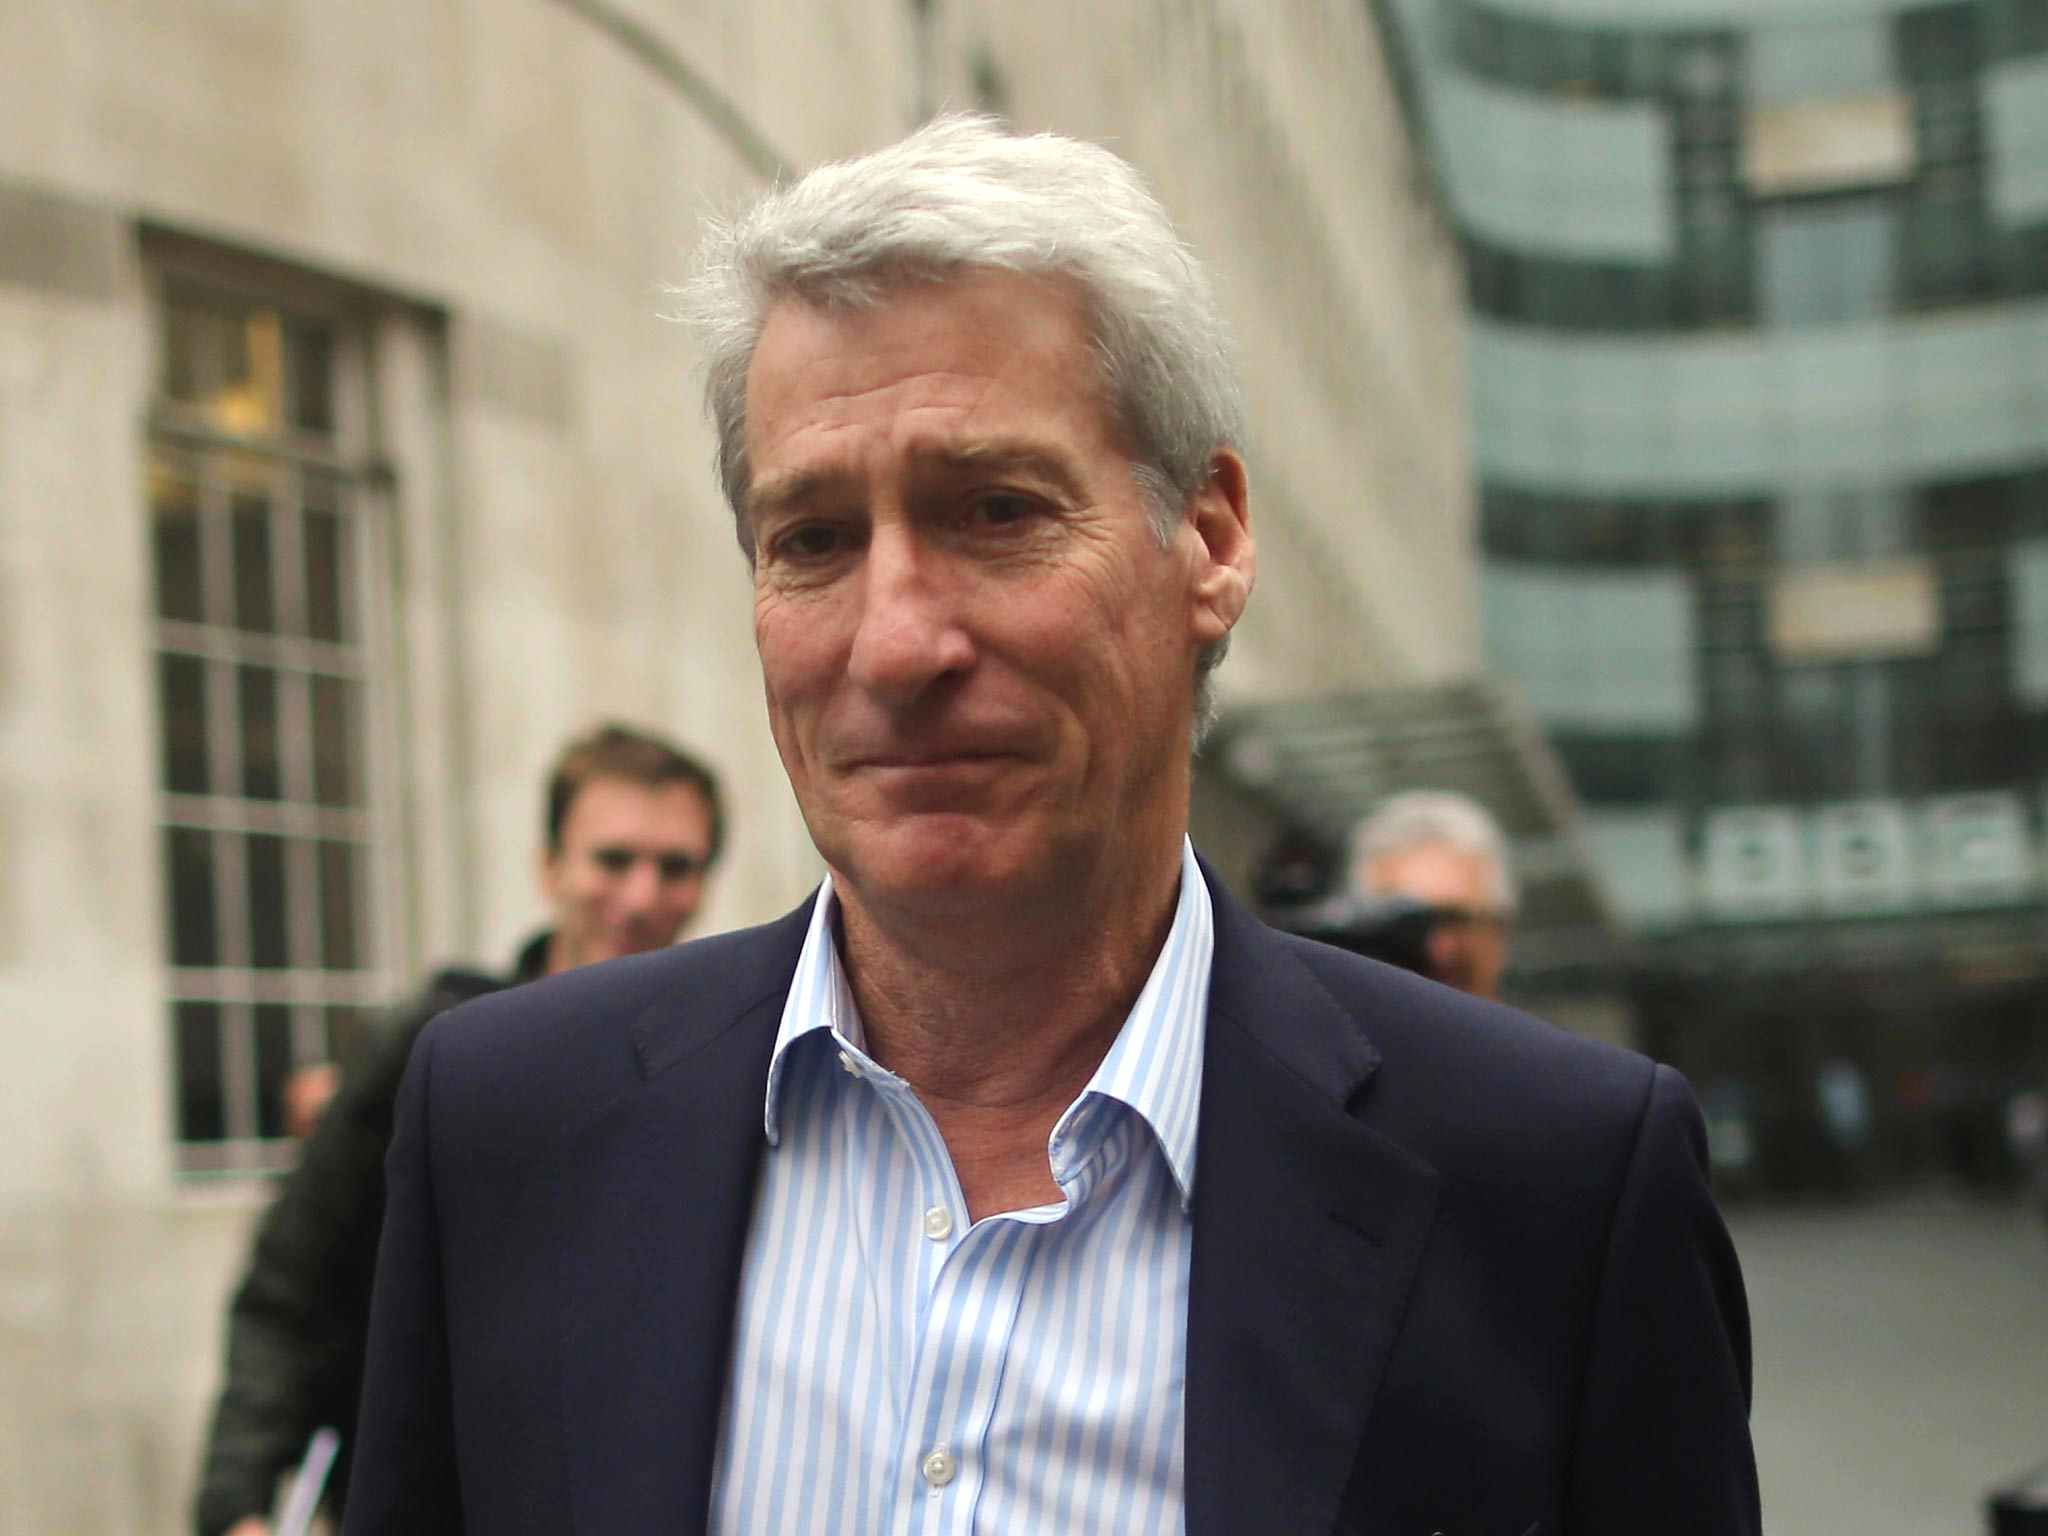 Not convinced by Paxman's Edinburgh Fringe booking? Neither is he